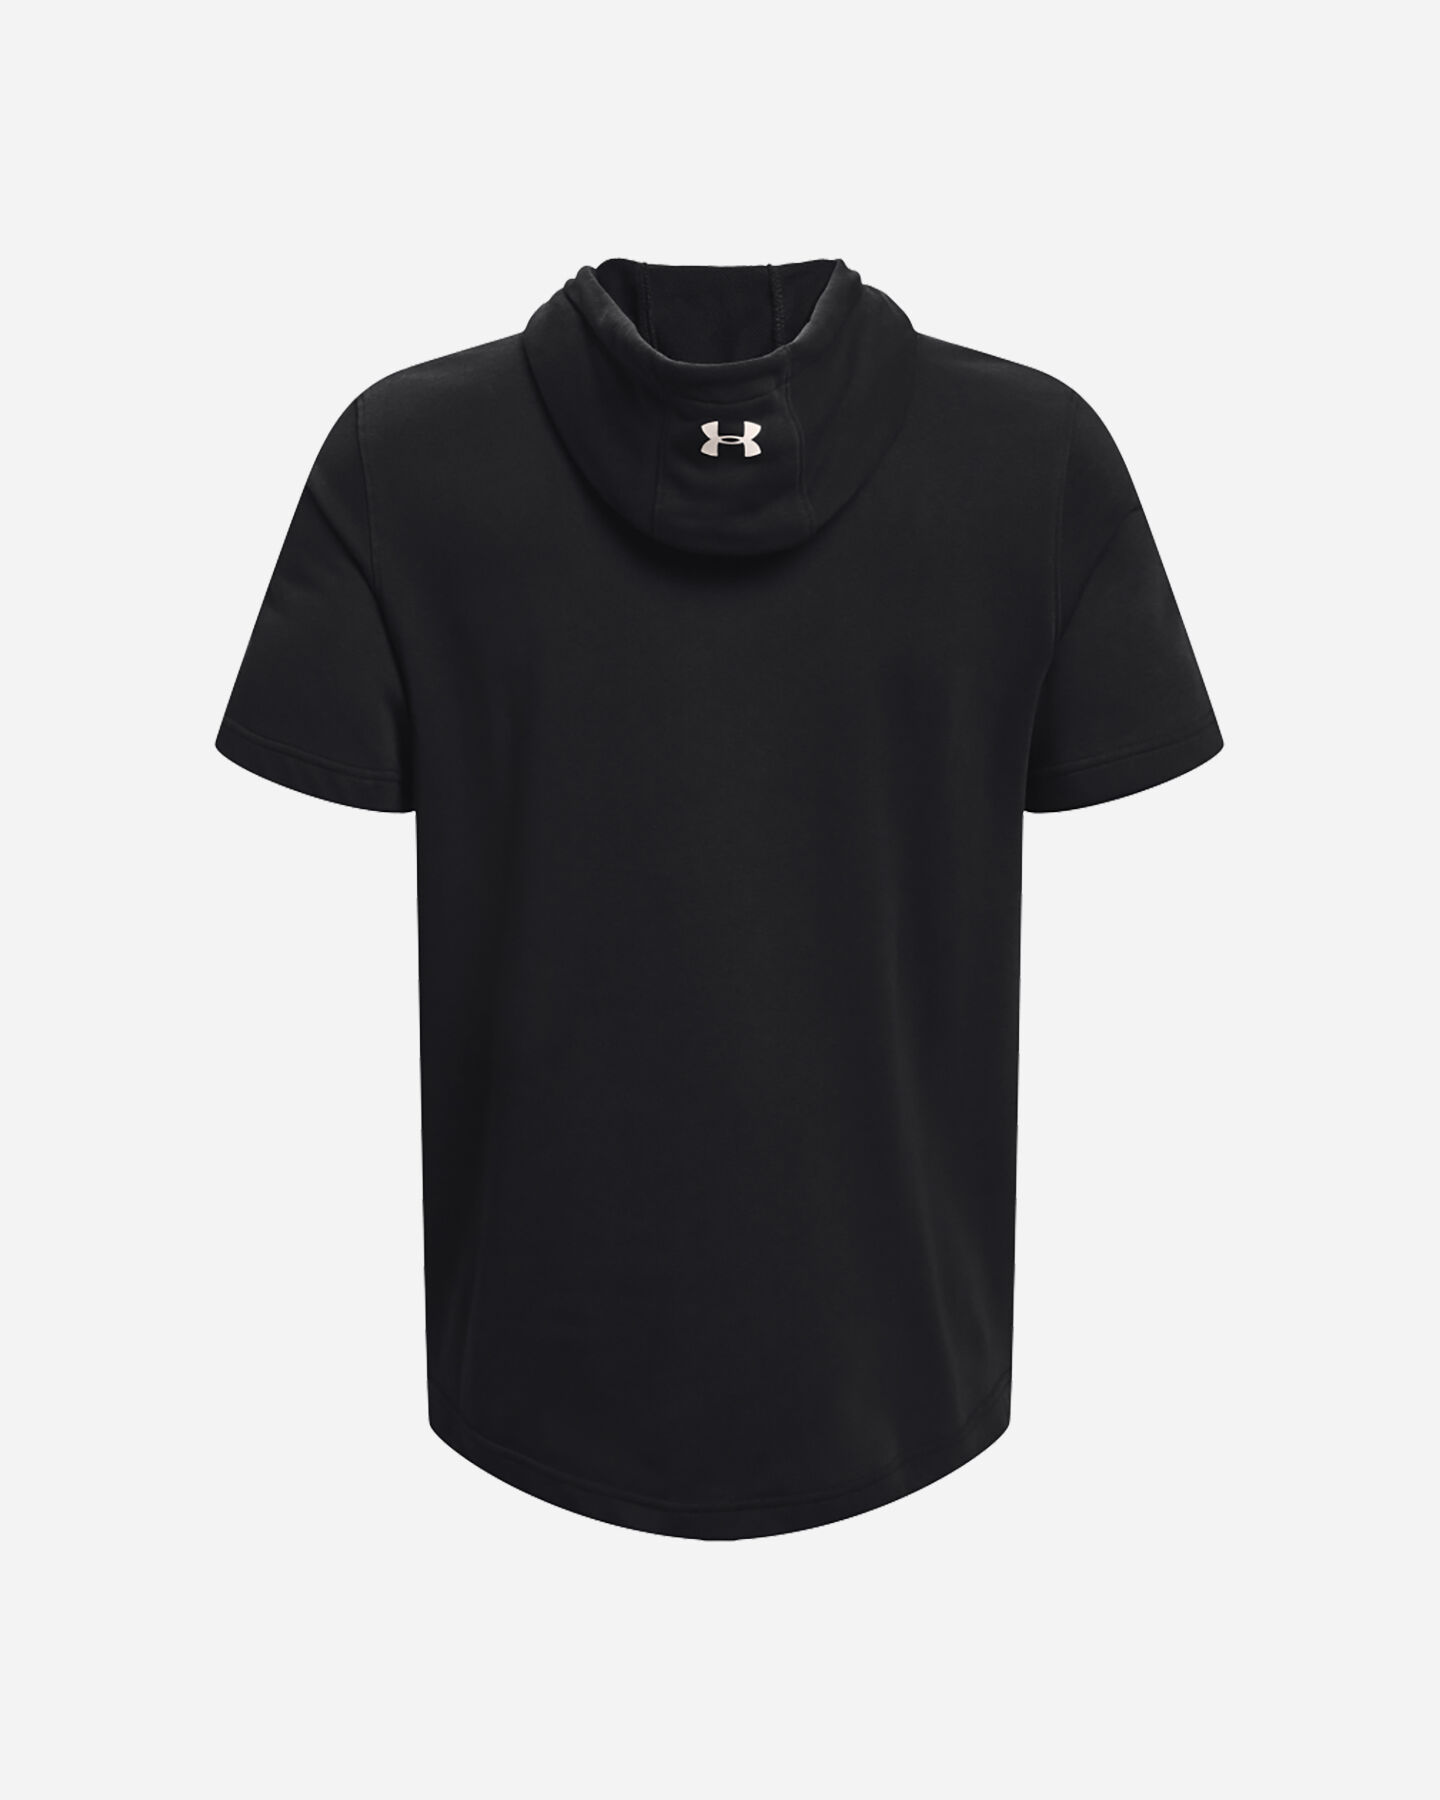  Felpa UNDER ARMOUR PROJECT ROCK M S5458856|0002|XS scatto 1